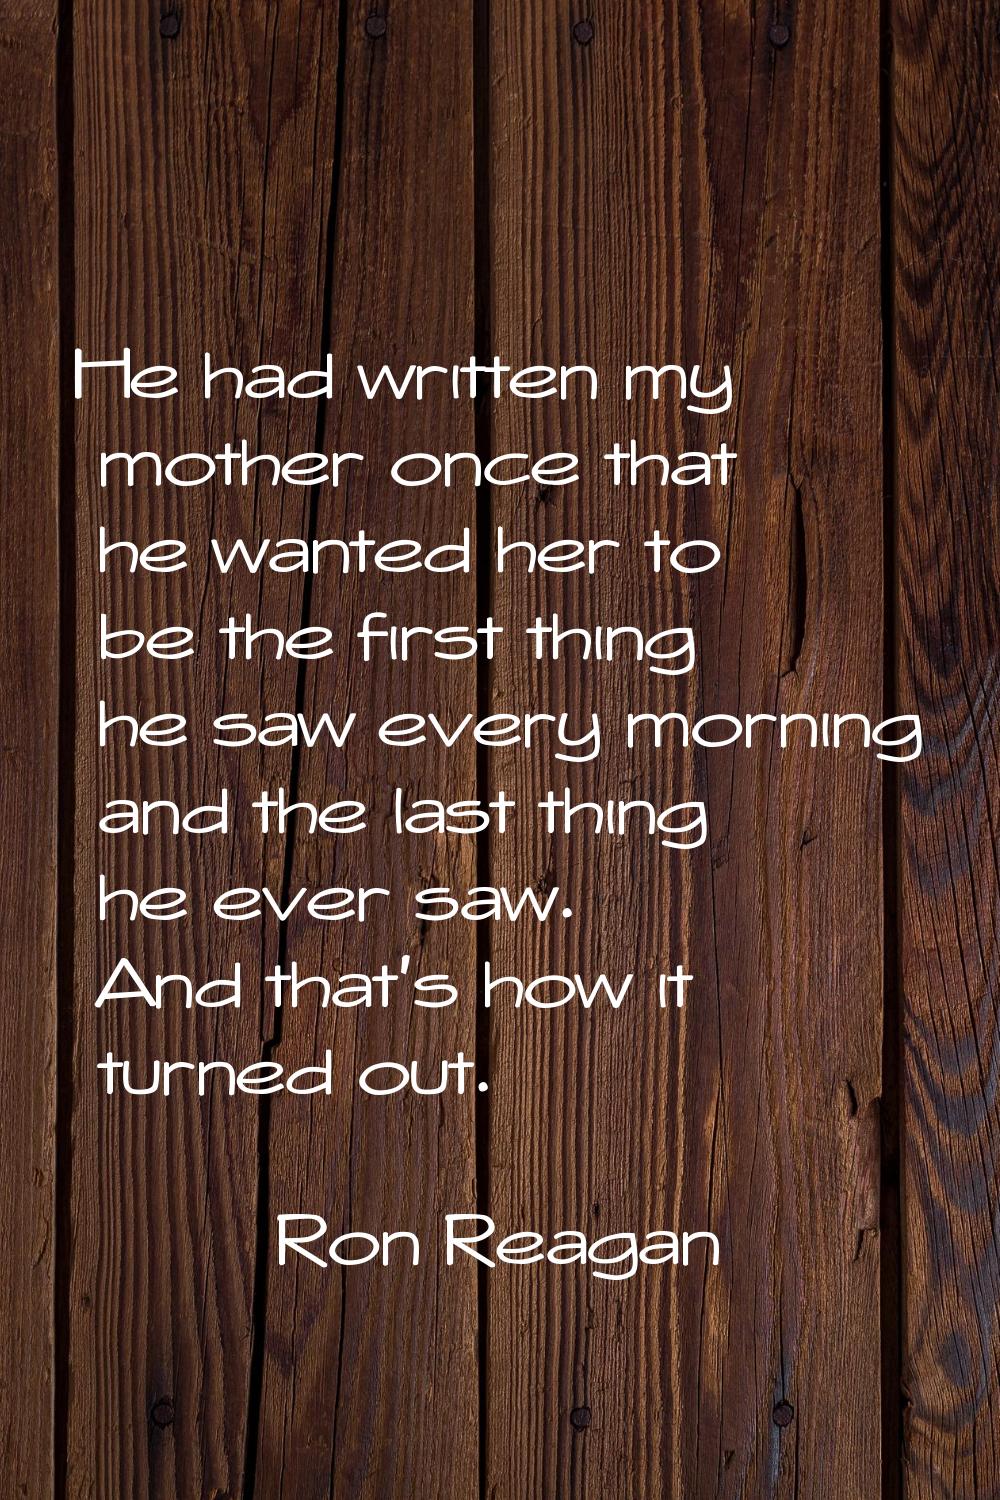 He had written my mother once that he wanted her to be the first thing he saw every morning and the